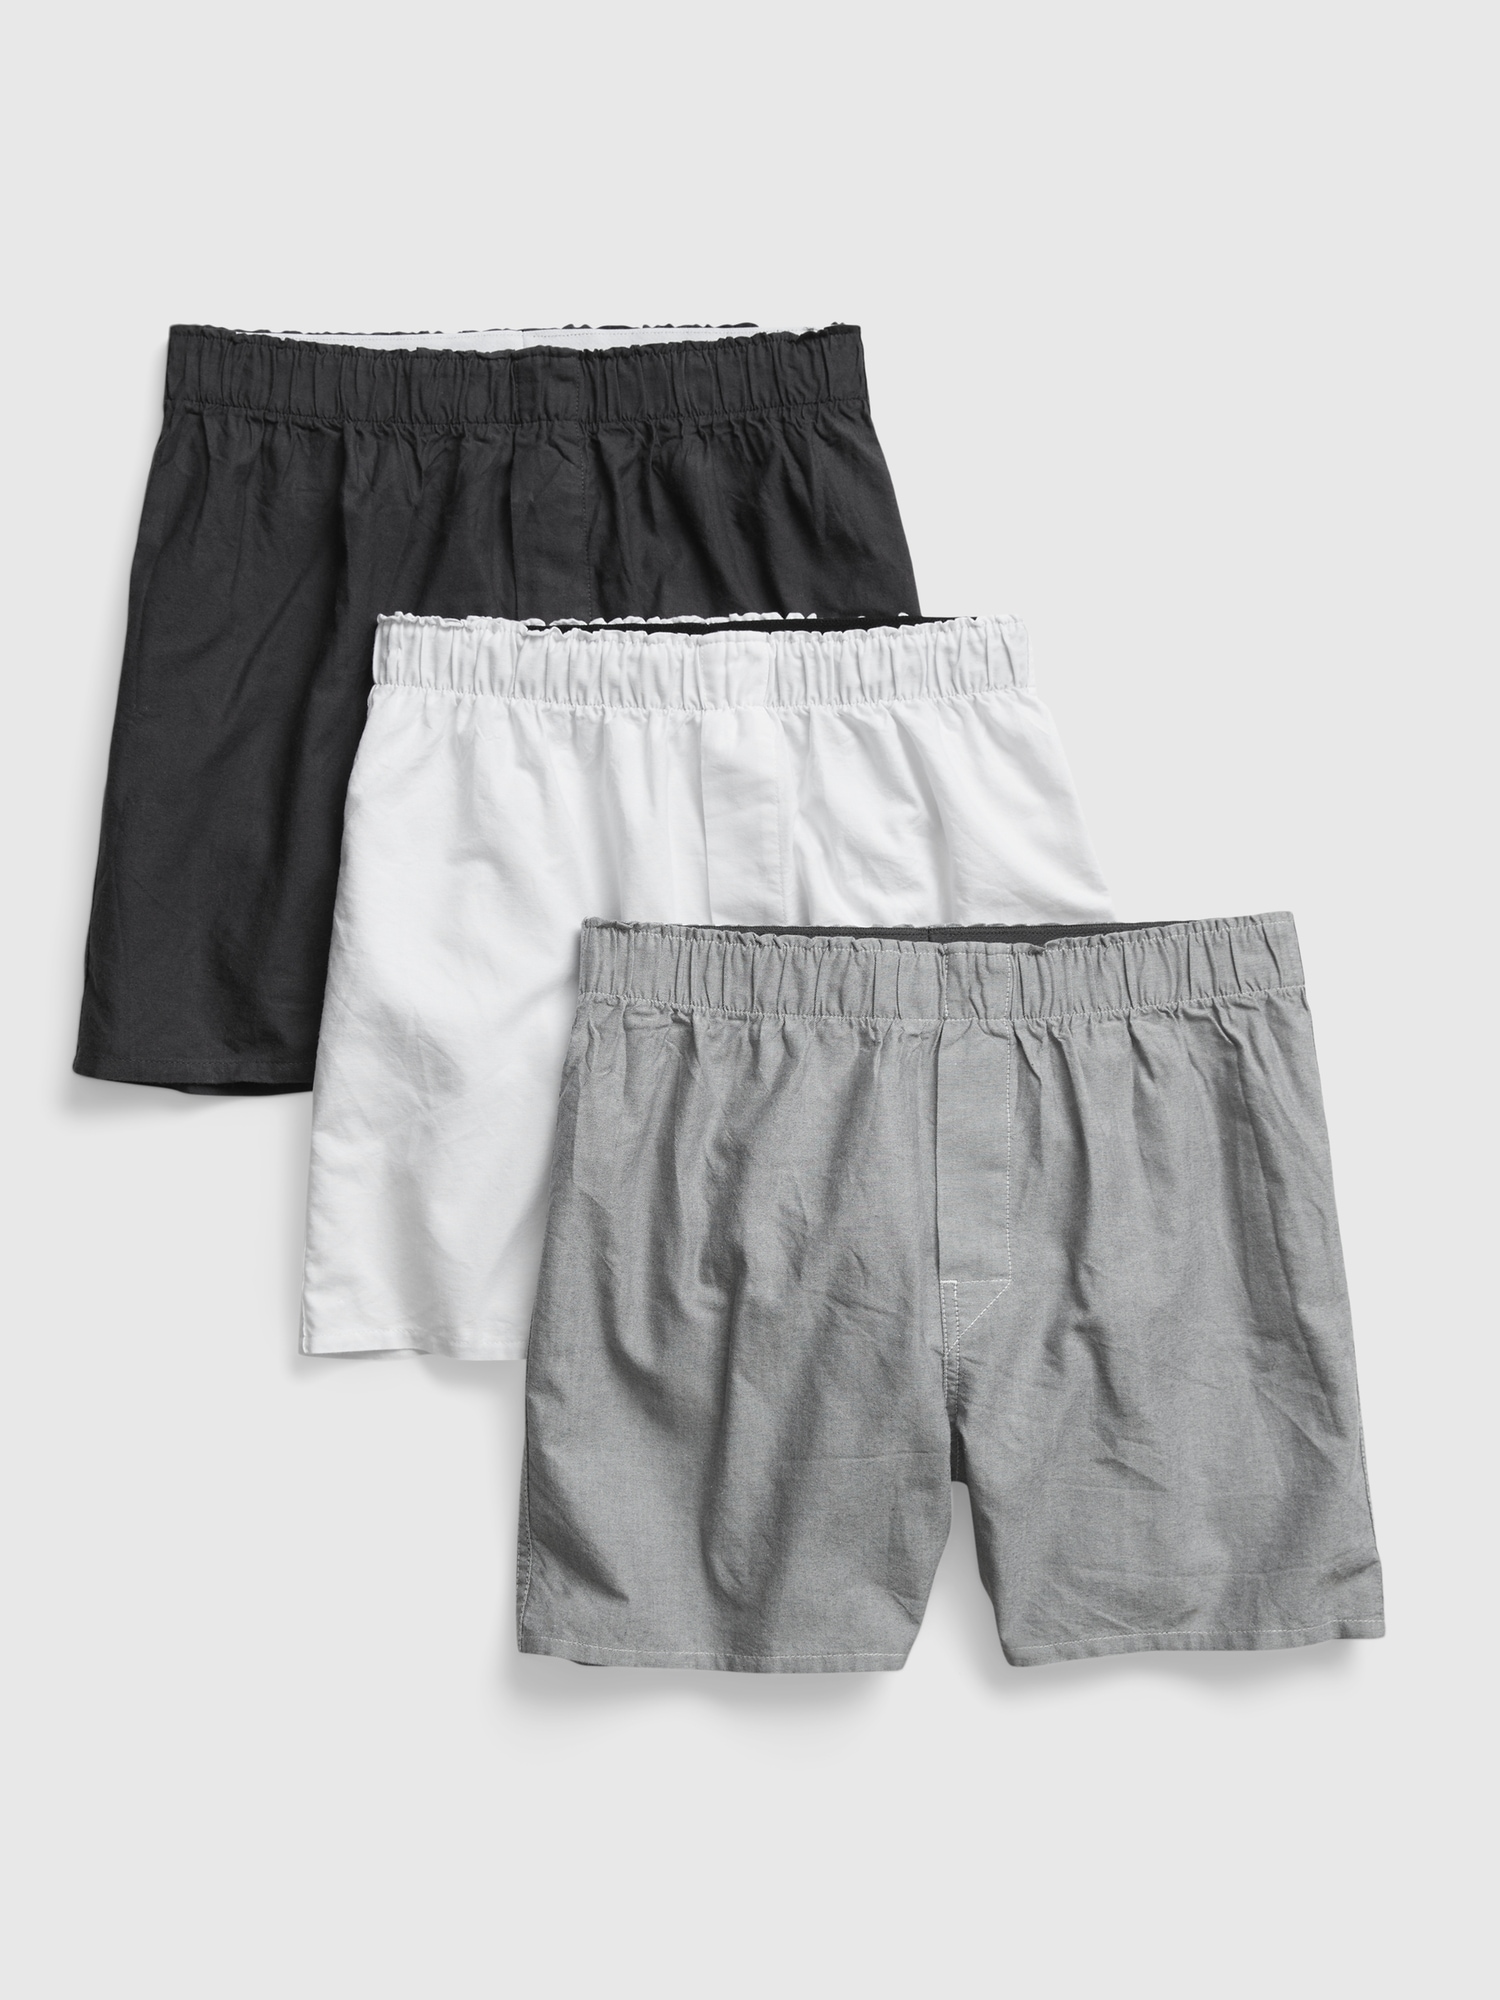 Boxers (3-Pack)